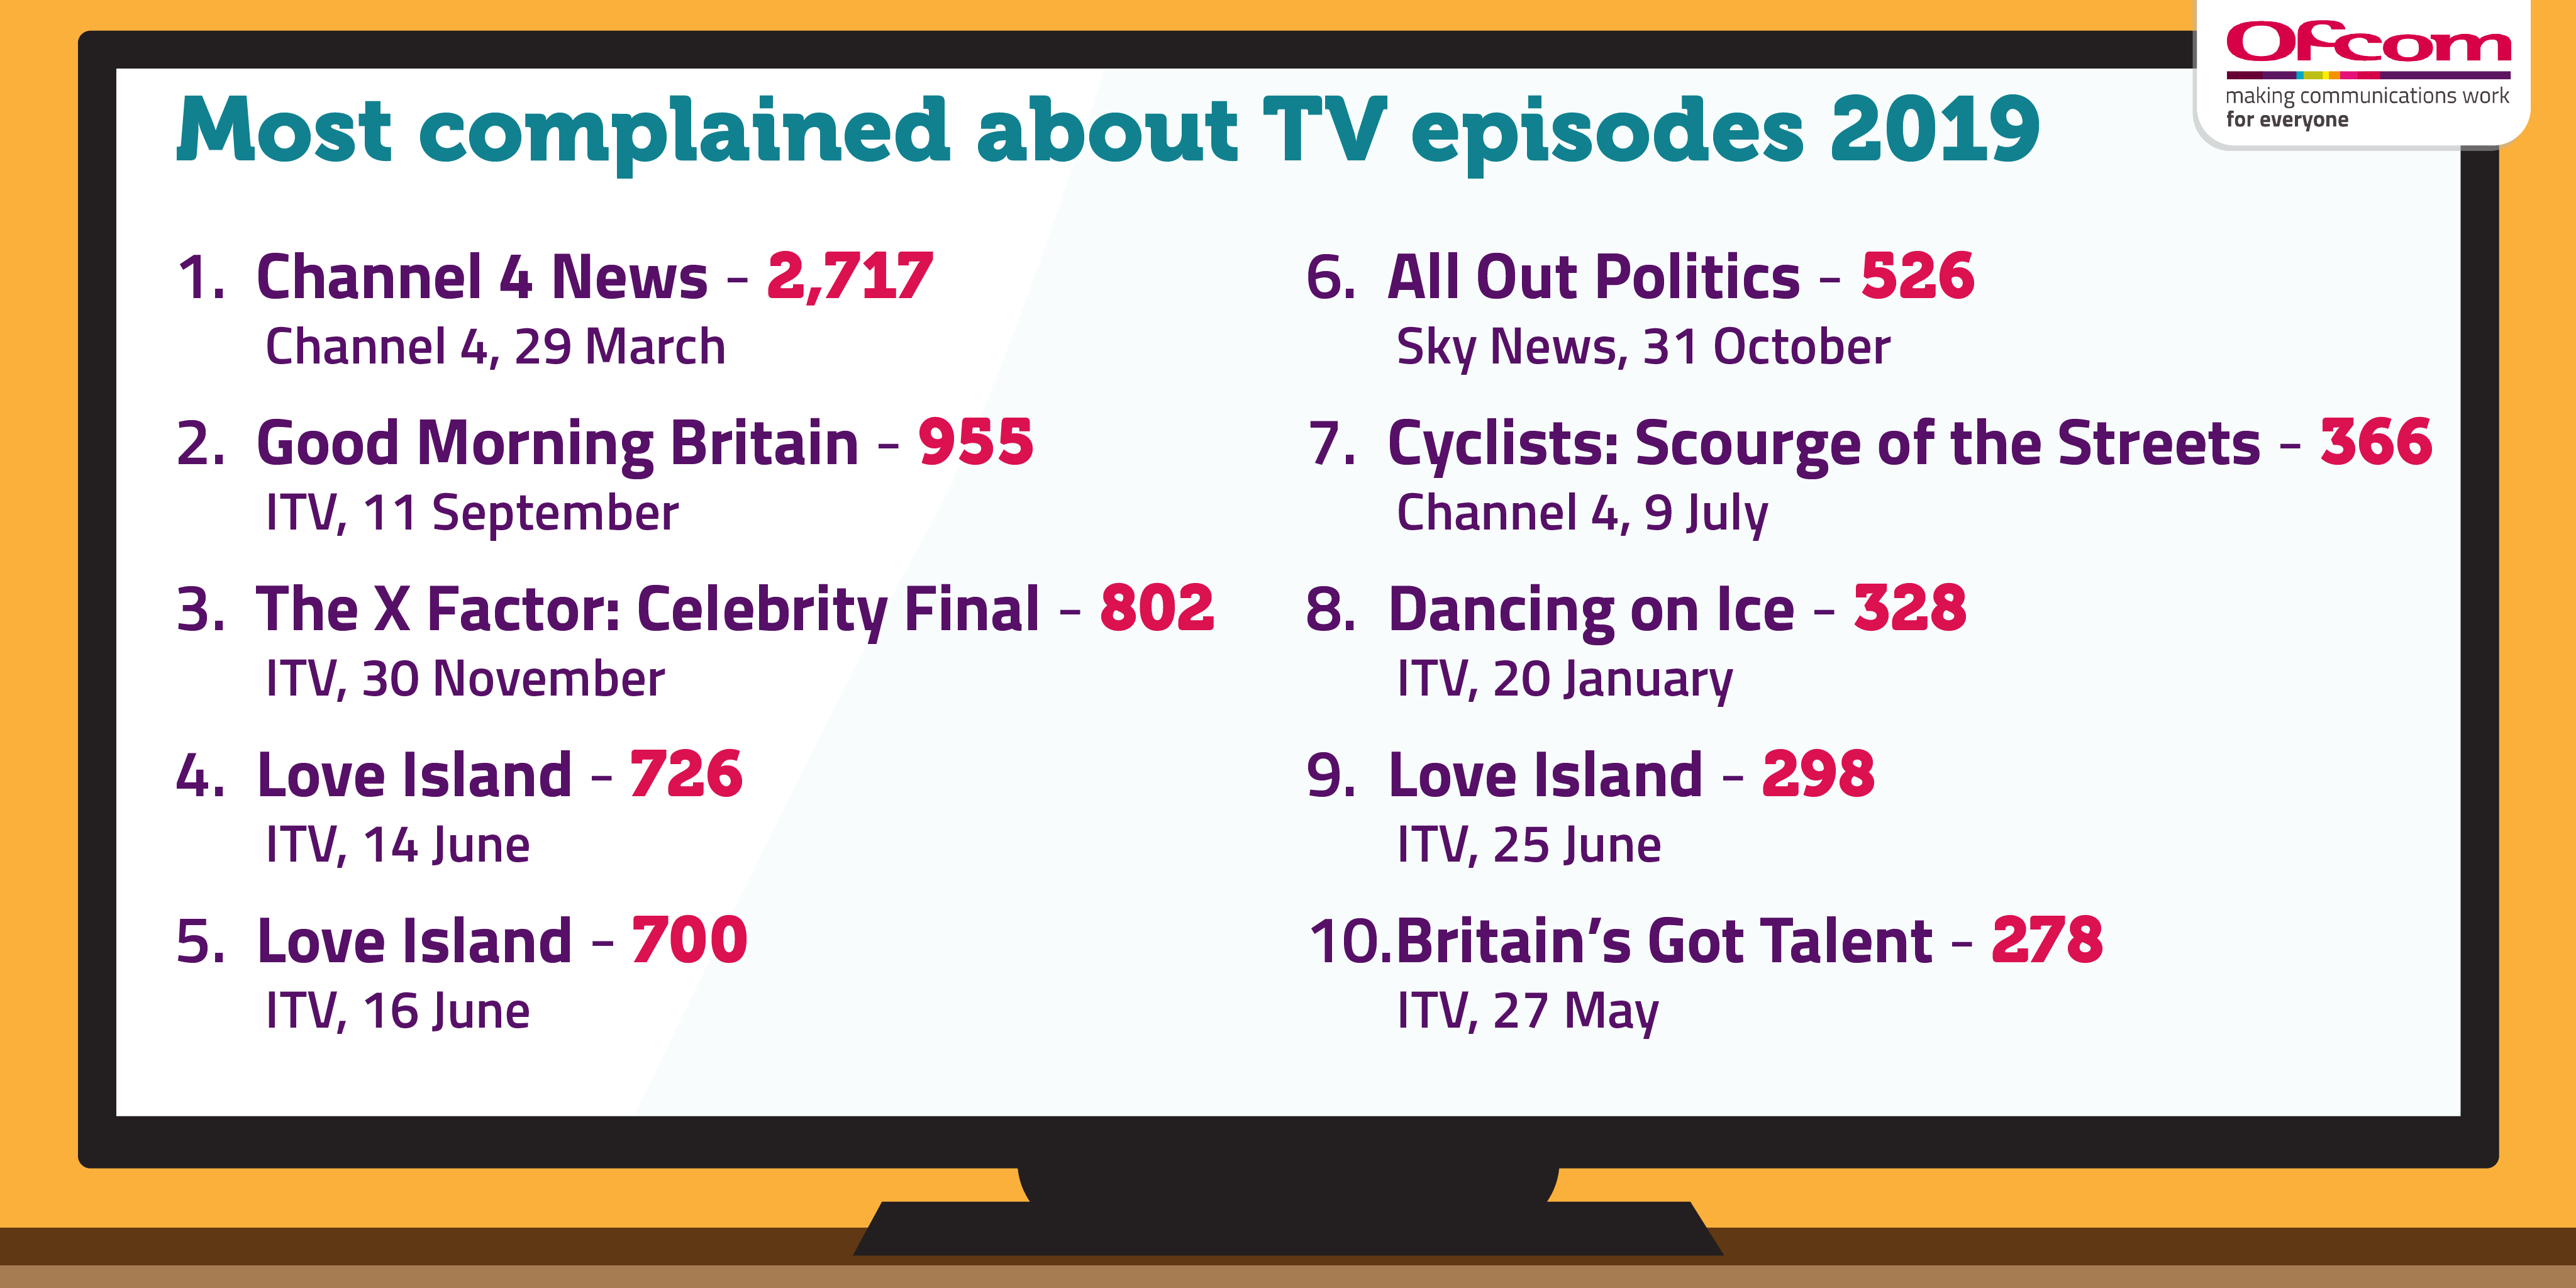 Most complained about TV episodes 2019